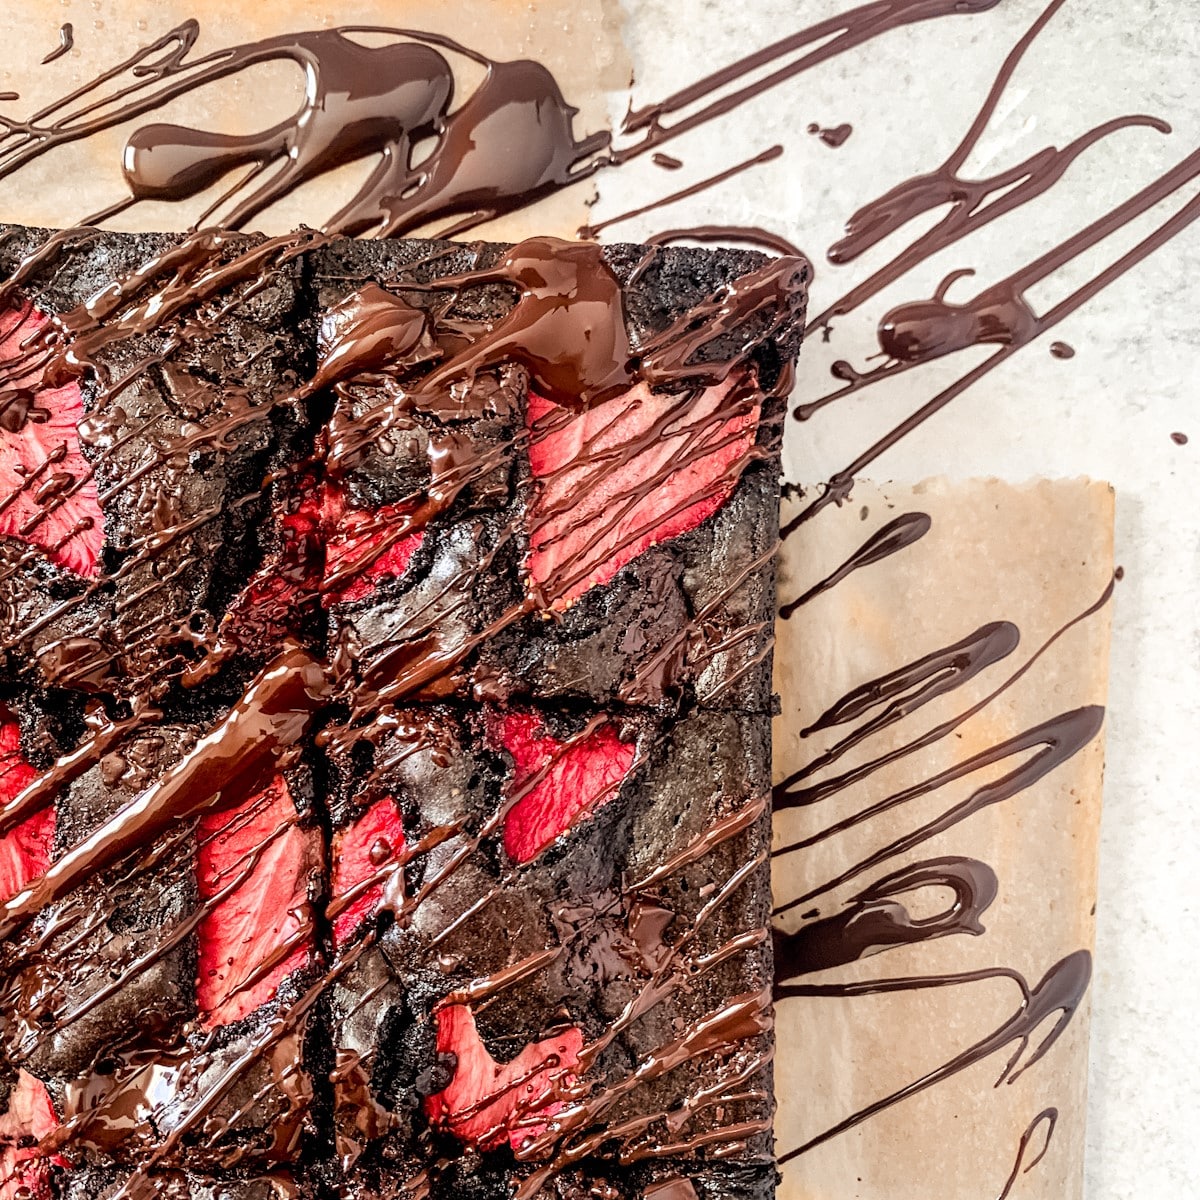 Closeup of sliced strawberry brownies with chocolate drizzle.